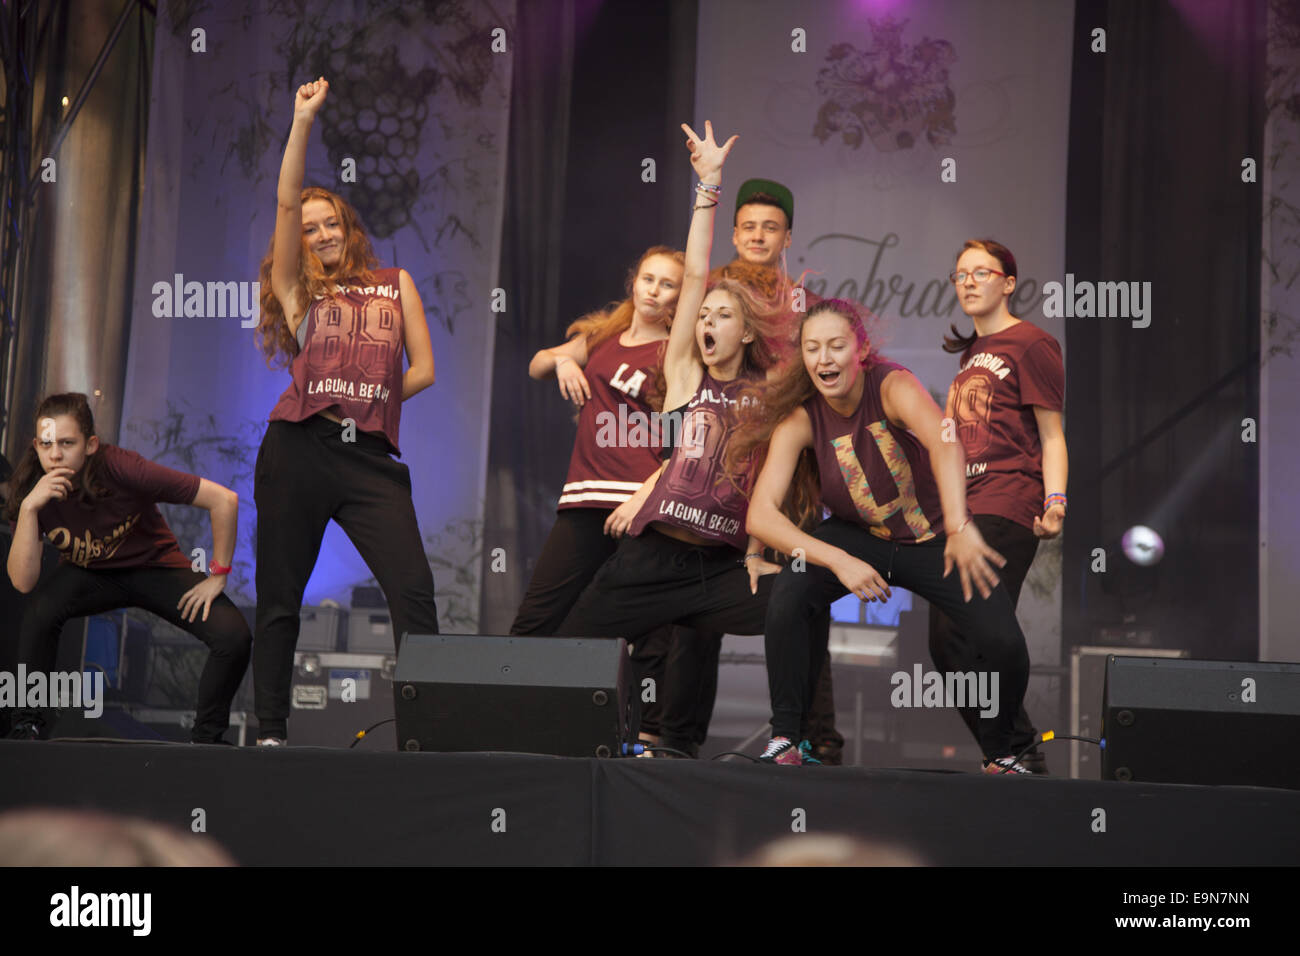 Teenage hip hop influenced dance group performs at a summer arts festival in Zielona Gora, Poland. Stock Photo